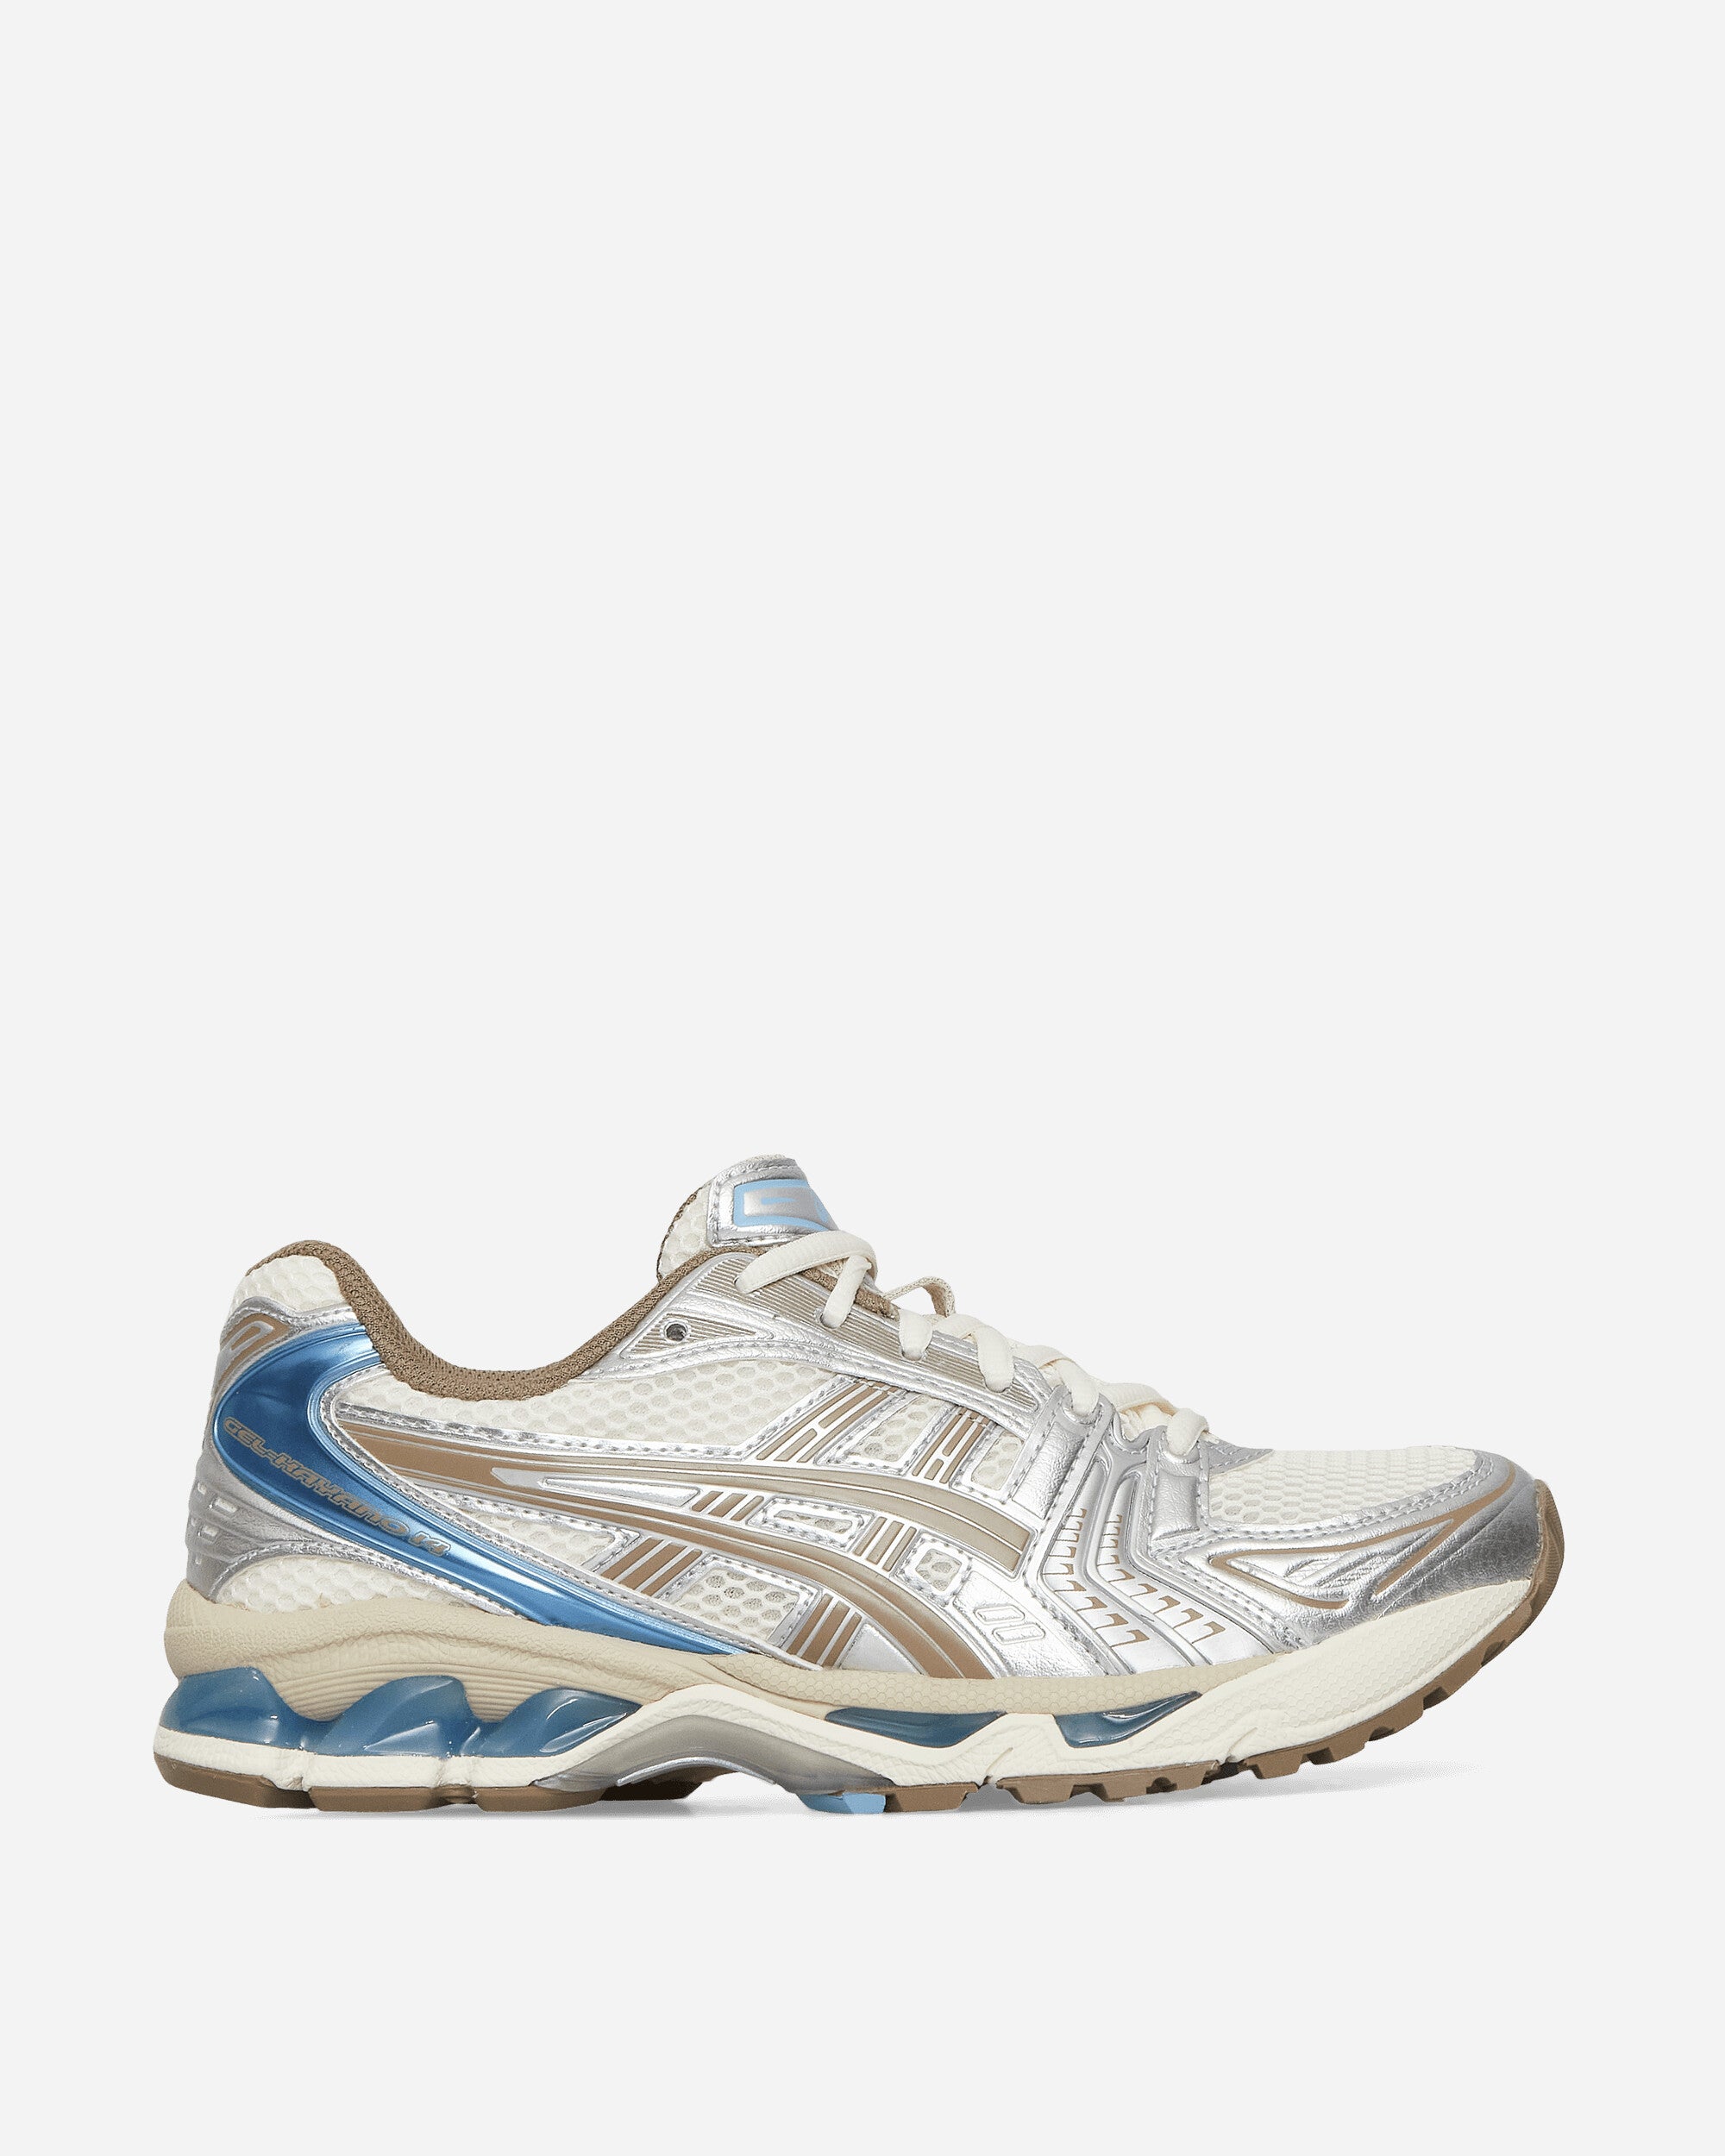 Asics Wmns Gel-Kayano 14 Cream/Pepper Sneakers Low 1202A056-113